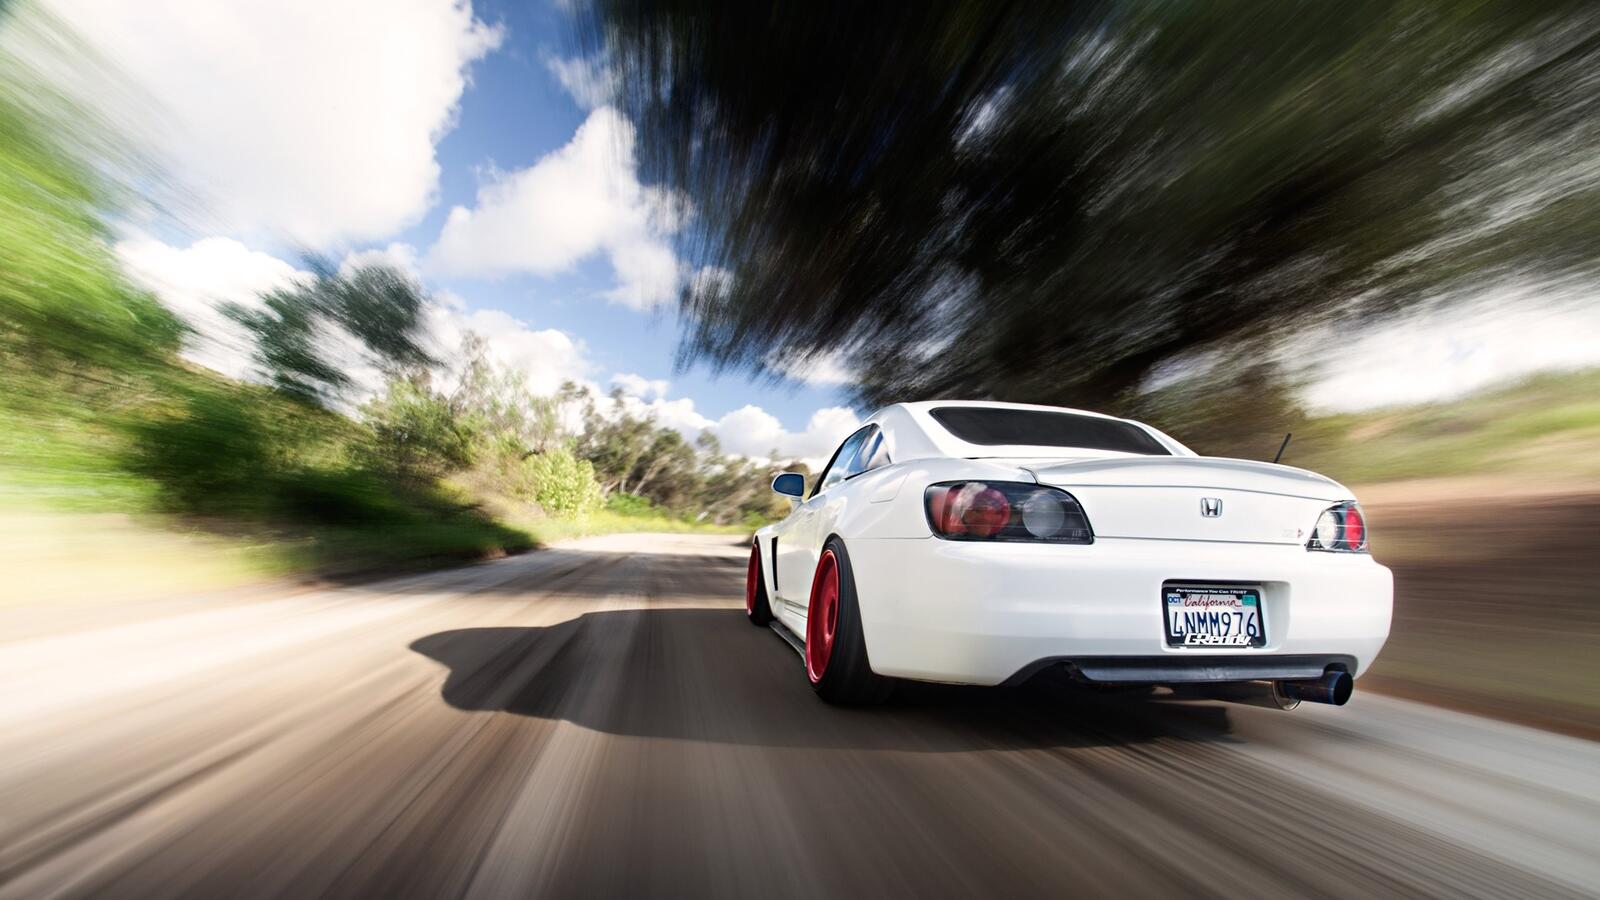 Wallpapers wallpaper honda s2000 view from behind in move on the desktop